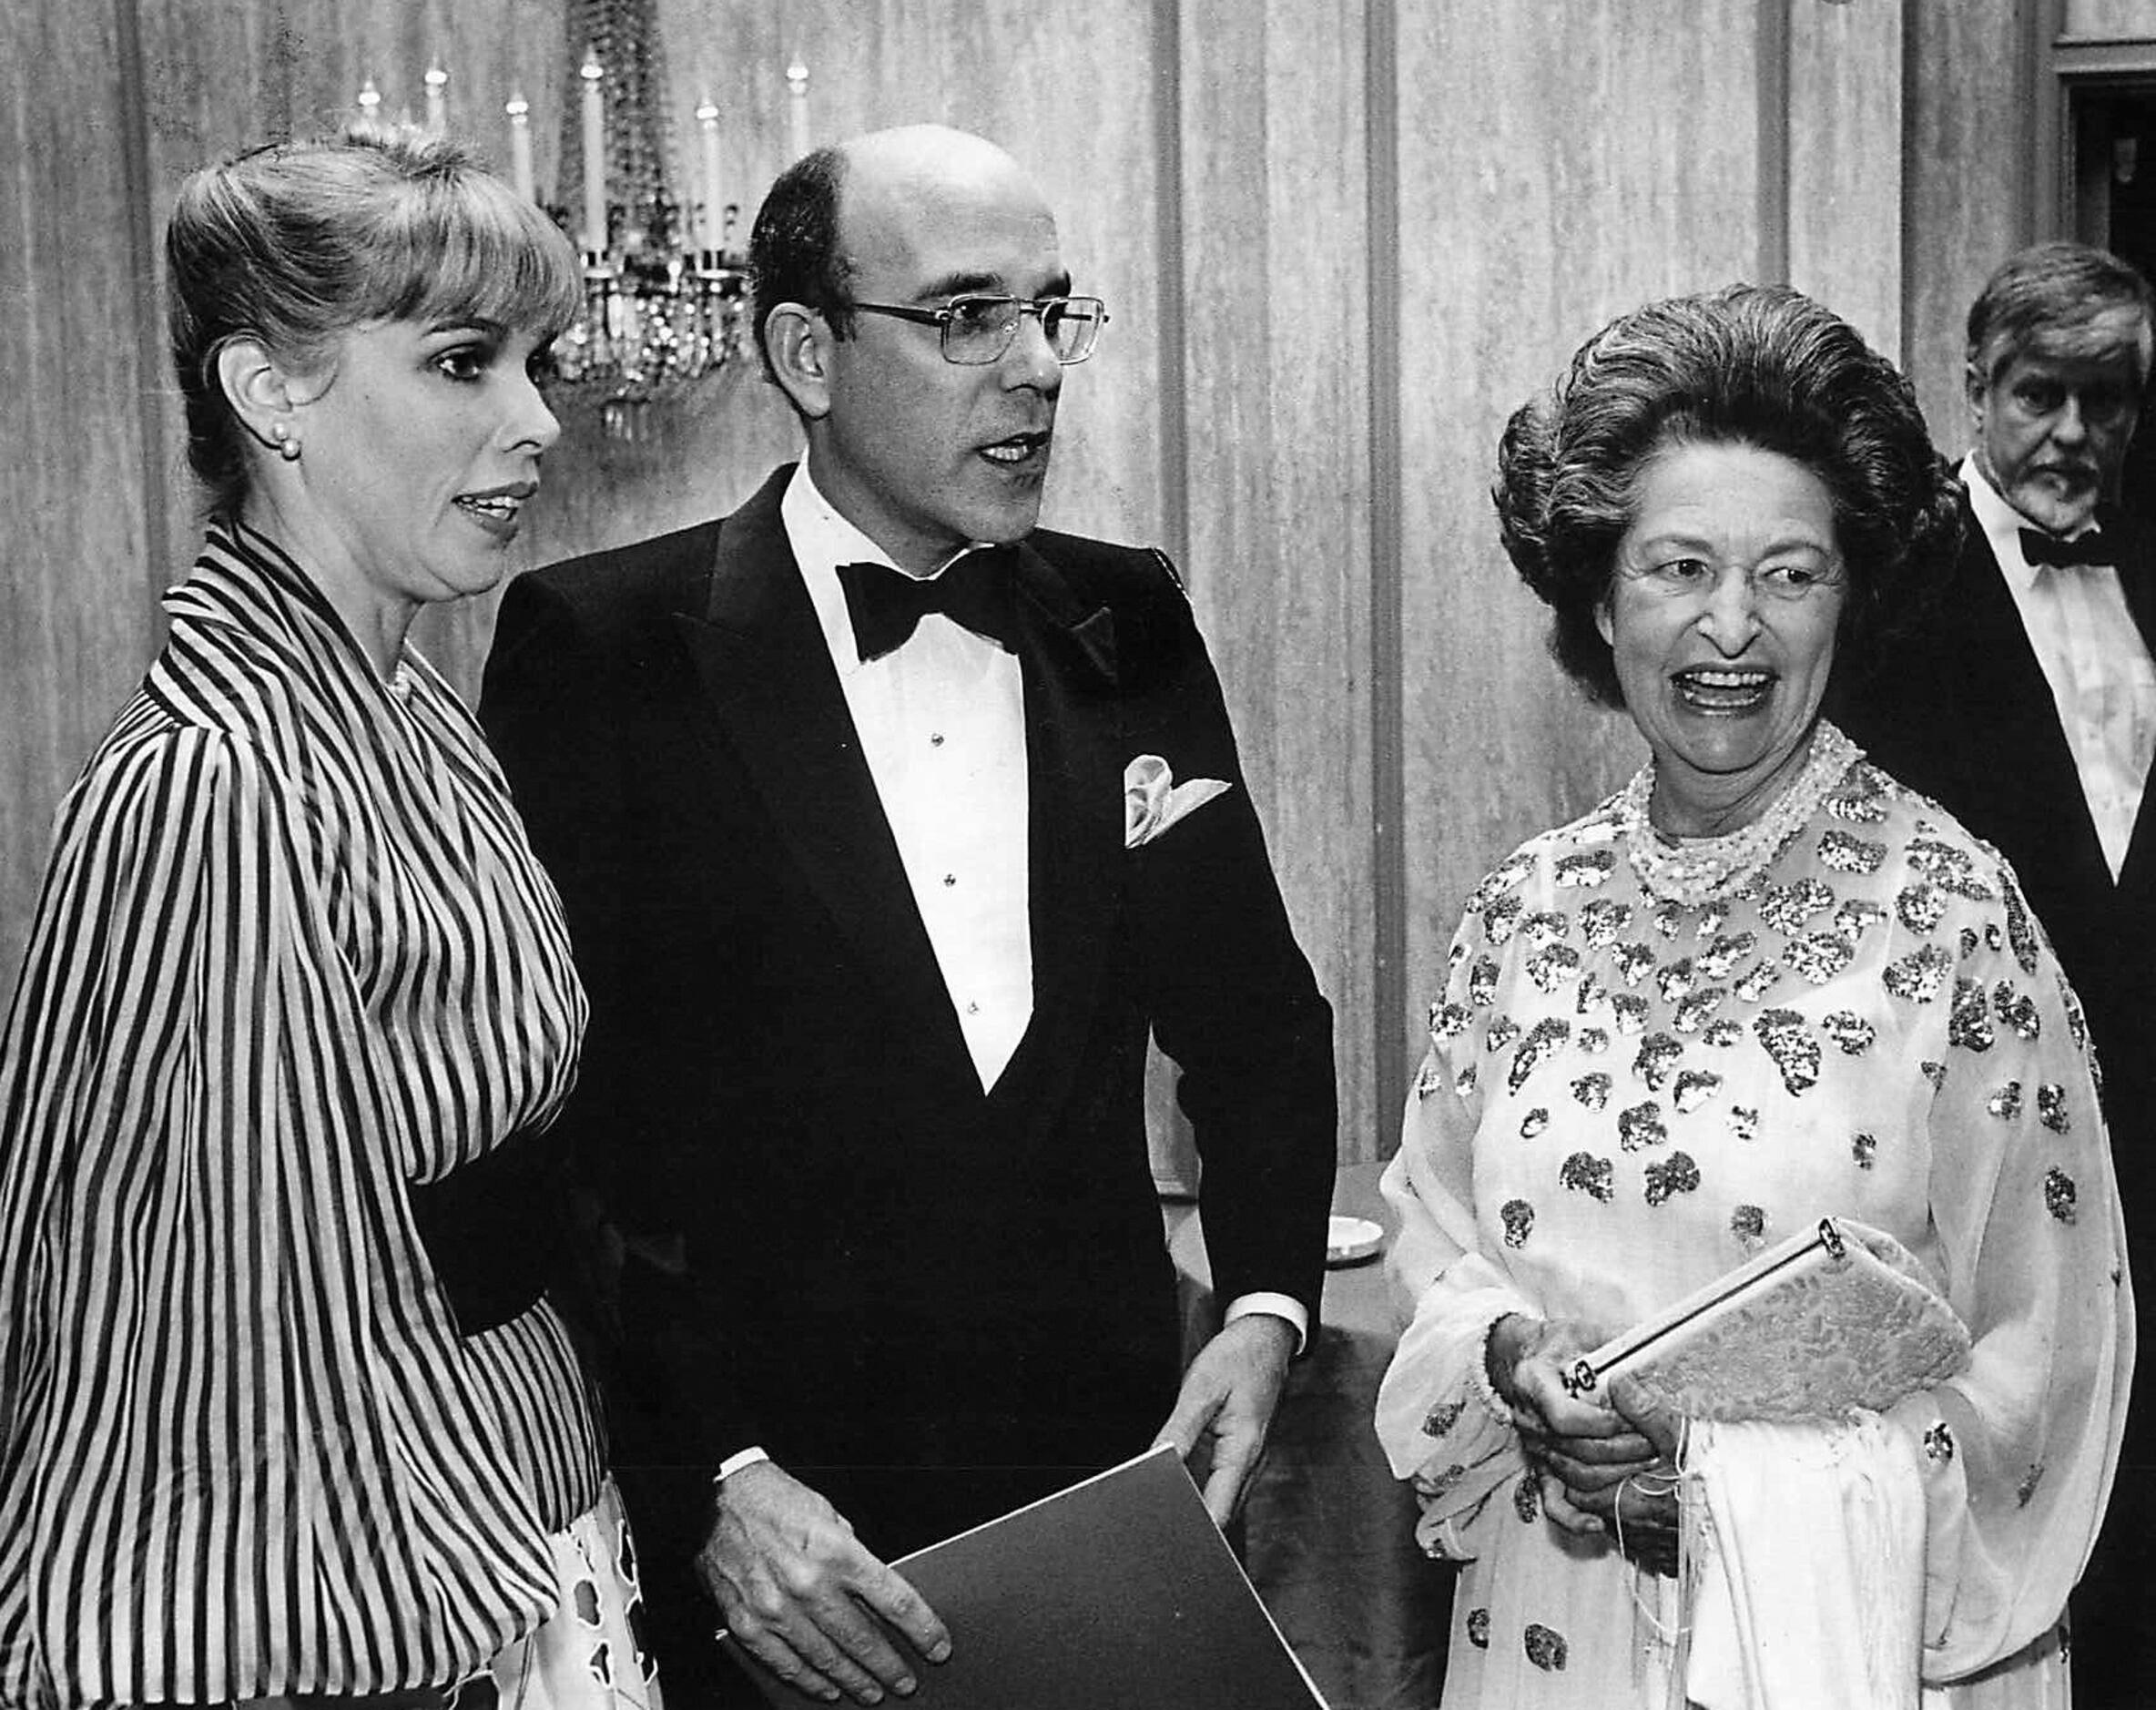 From left: Heather Marcus, Richard Marcus and Lady Bird Johnson attended a party celebrating...